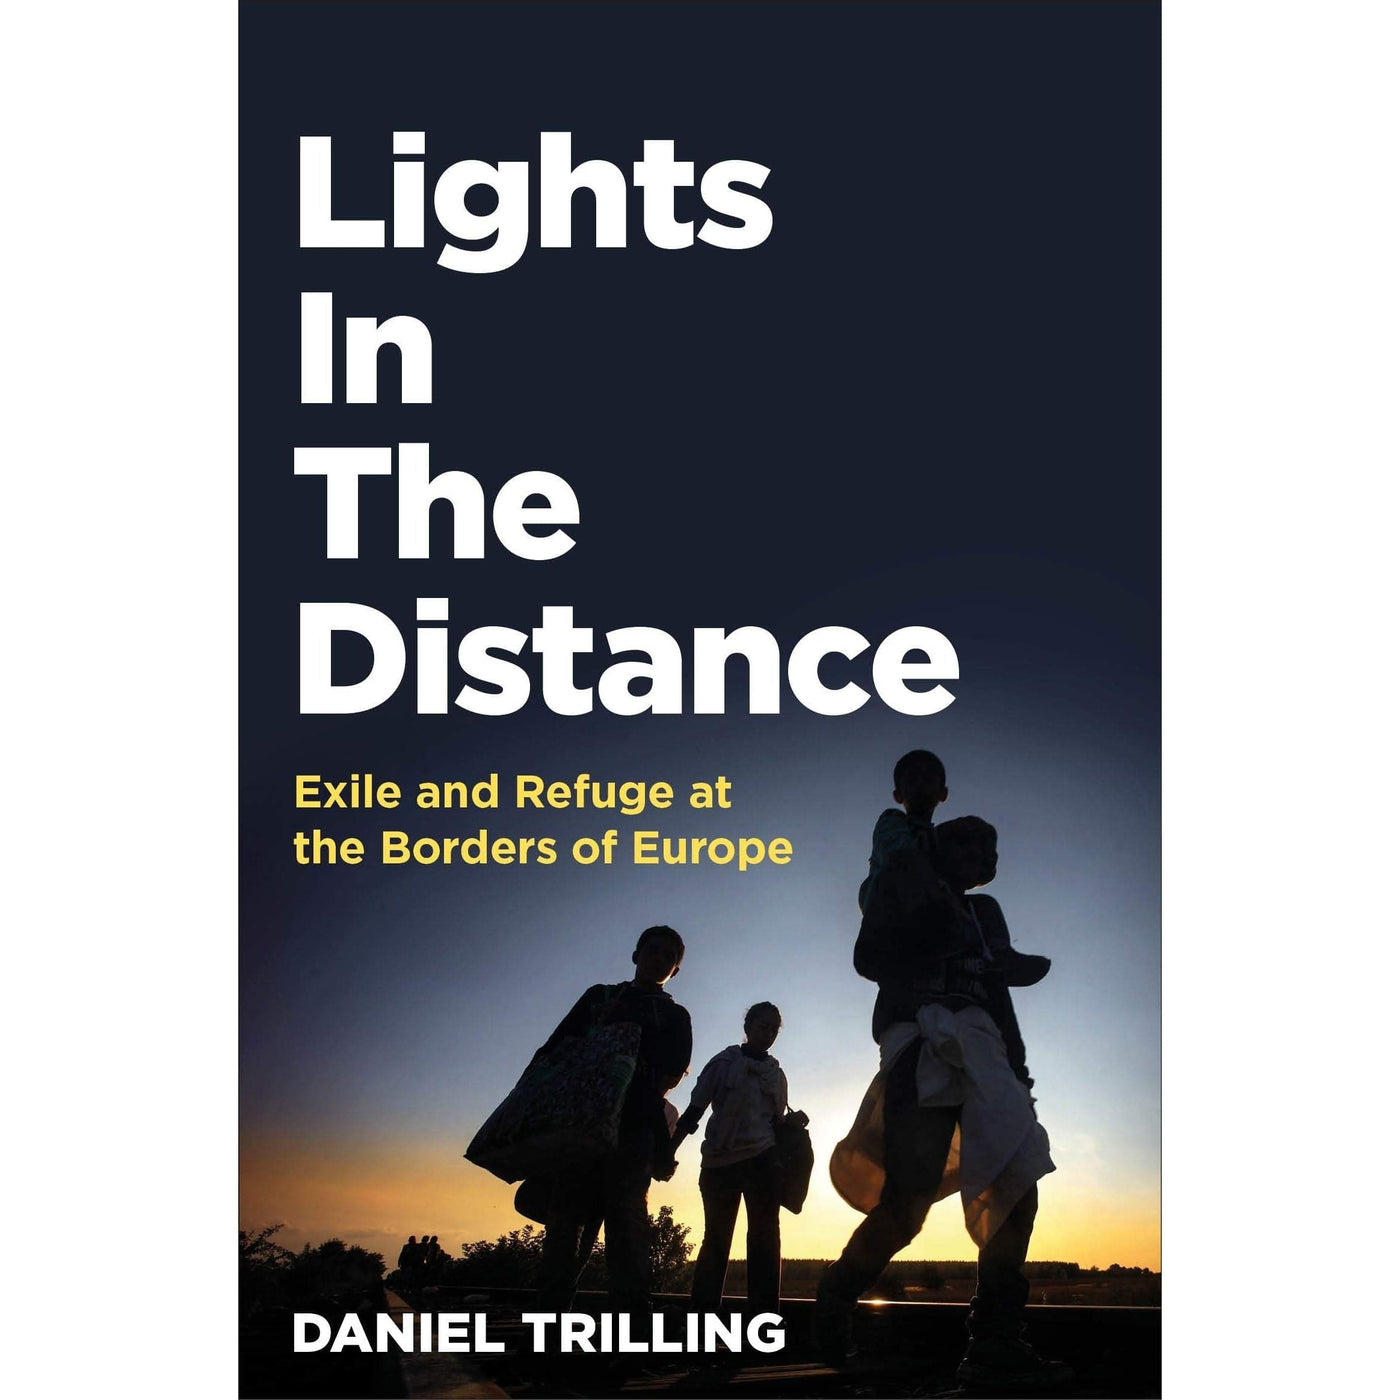 Daniel Trilling: Lights in the Distance Exile and Refuge at the Borders of Europe